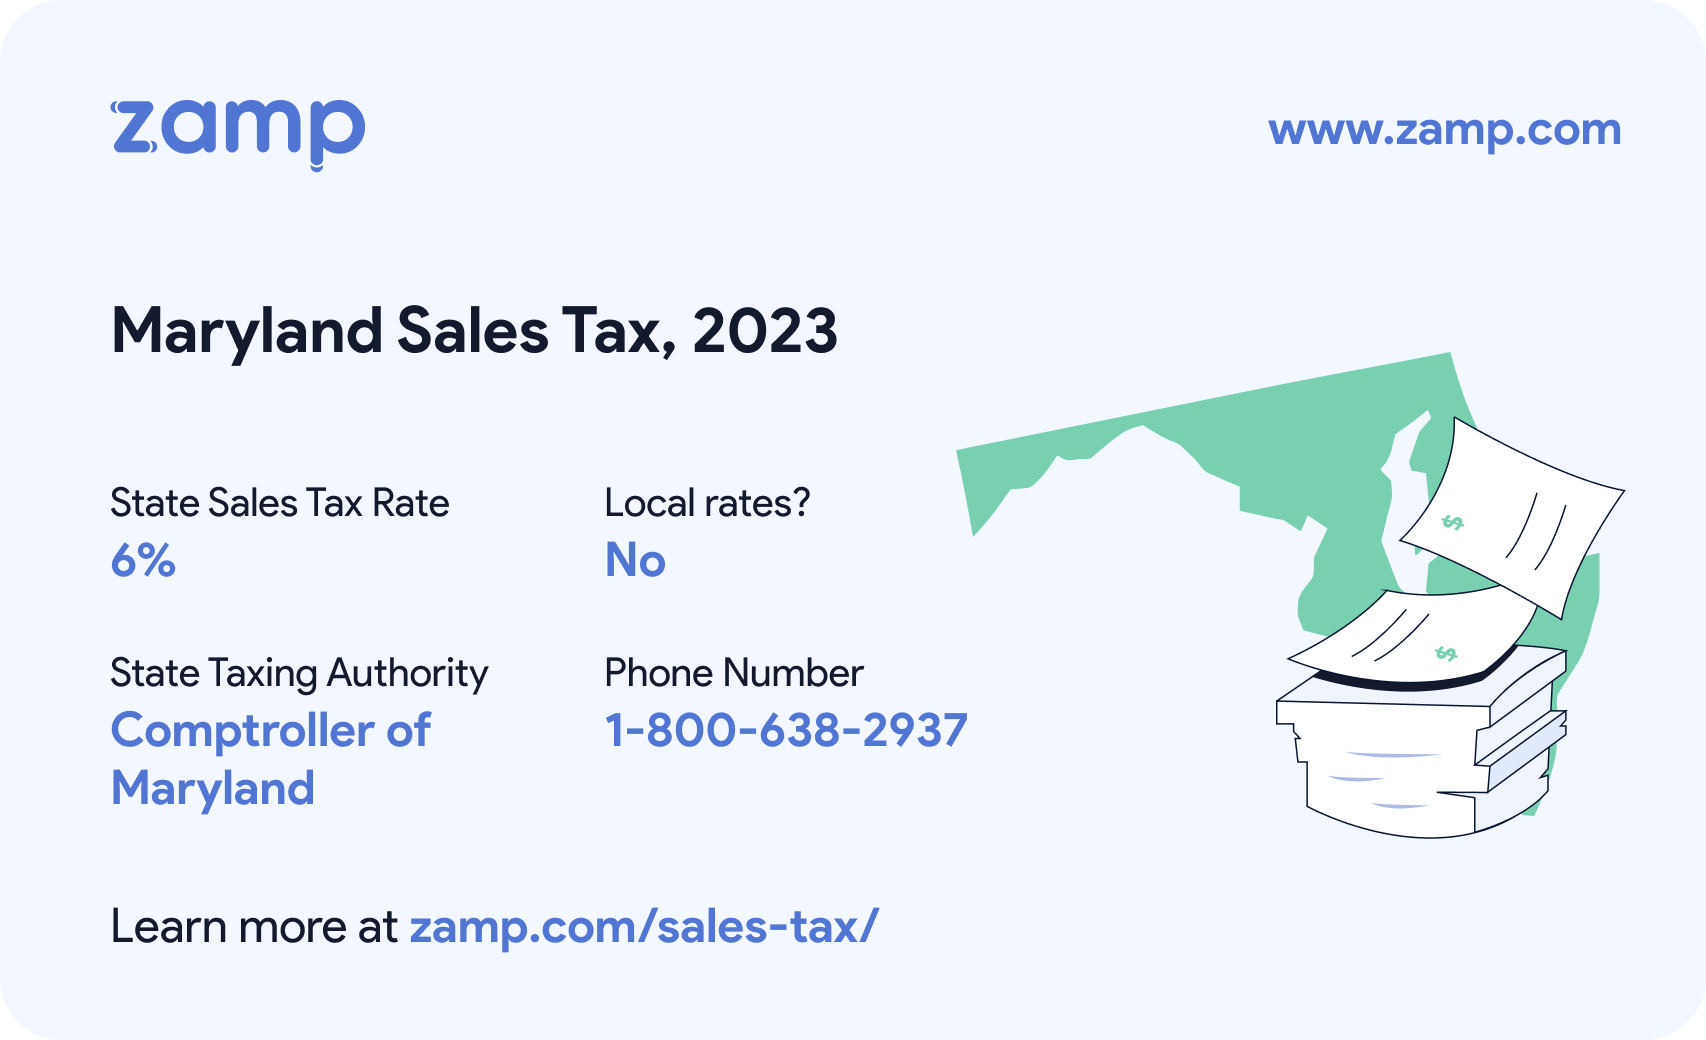 Maryland basic sales tax info for 2023 - State sales tax rate: 6%, Local rates? No; State Taxing Authority: Comptroller of Maryland; and phone number 1-800-638-2937